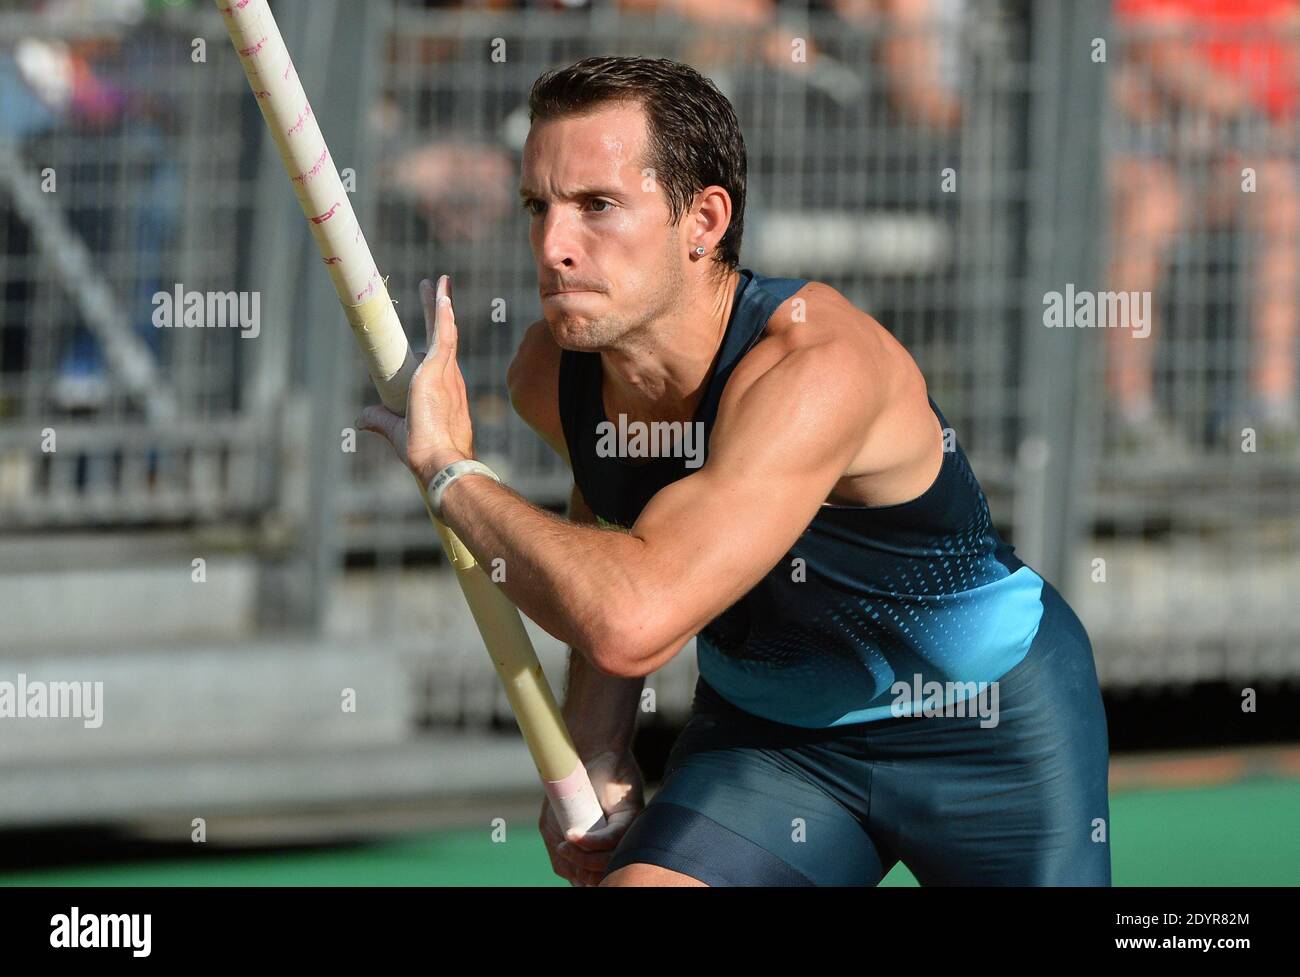 Olympic champion Renaud Lavillenie of France established a pole vault  indoor world record with an effort of 6.16 metres at a meeting in Donetsk,  Ukraine, on February 15, 2014. The previous mark